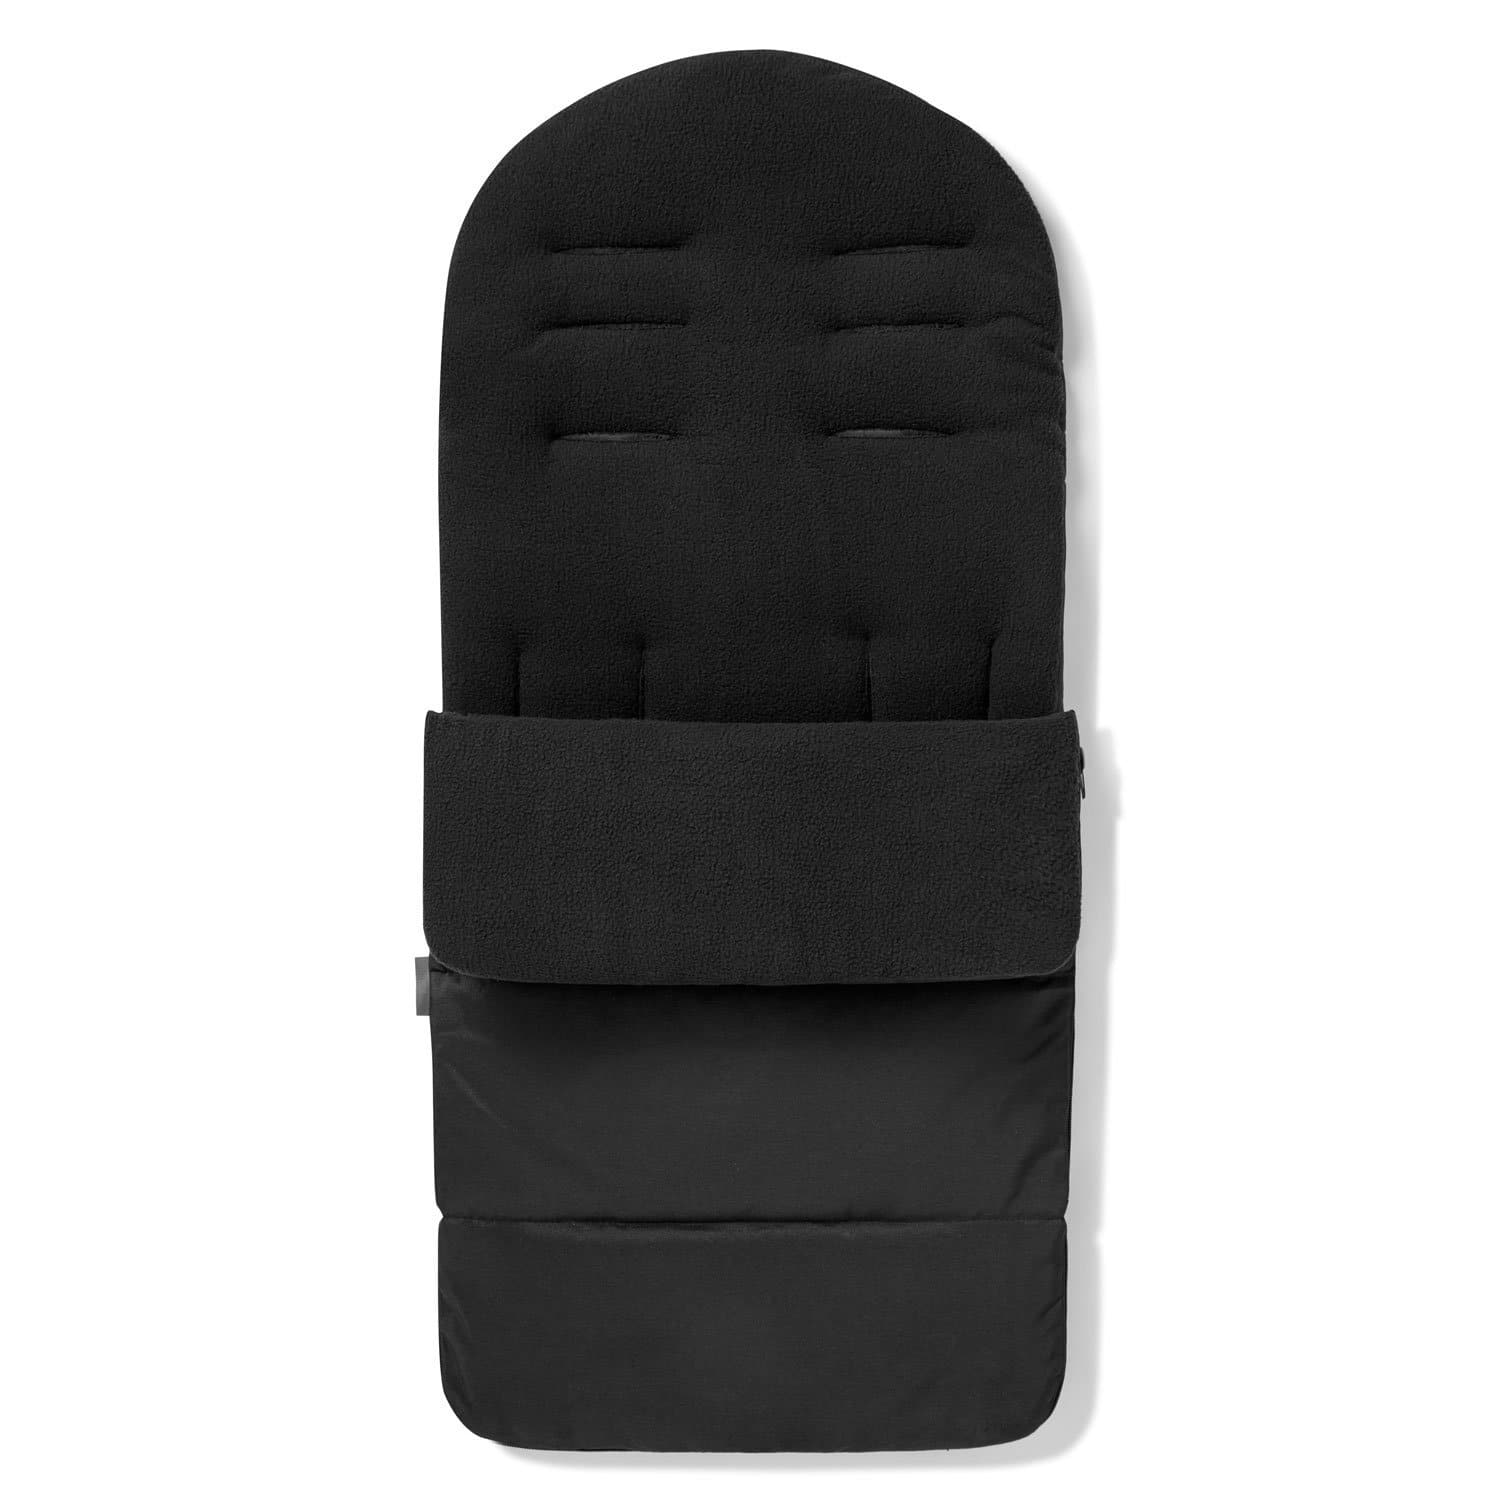 Premium Footmuff / Cosy Toes Compatible with Baby Jogger - For Your Little One